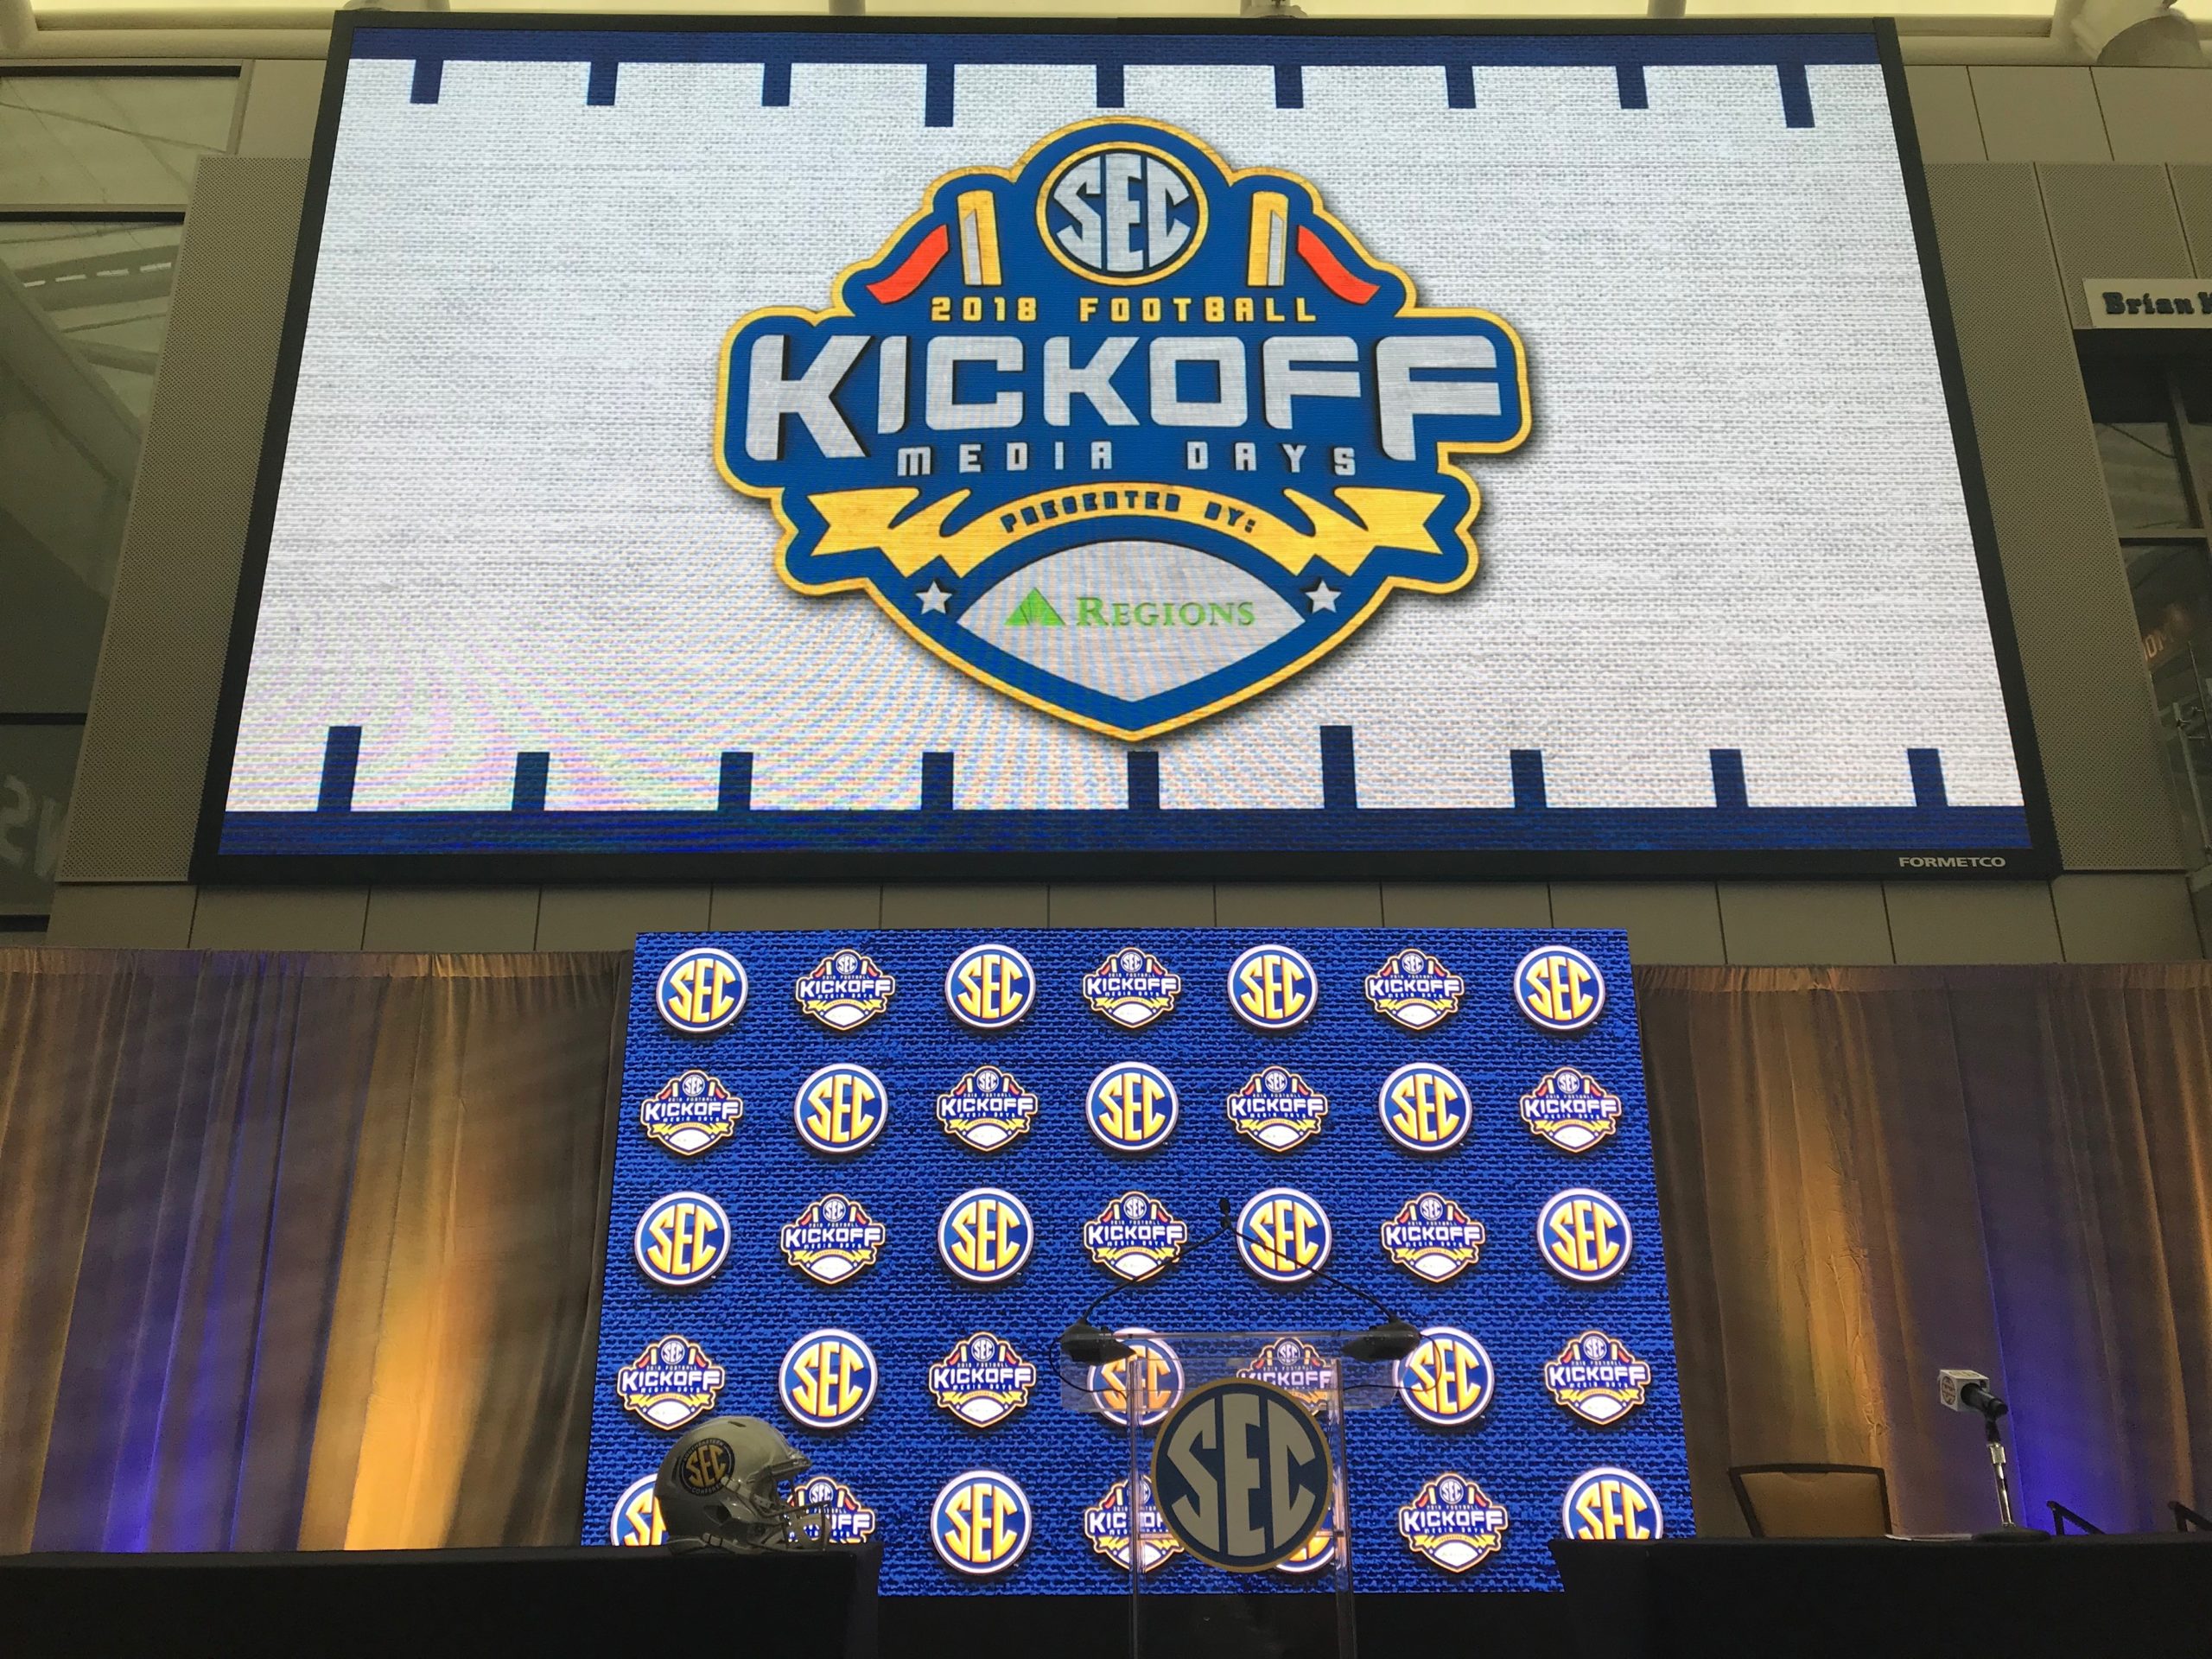 Schedule Announced for 2019 SEC Media Days